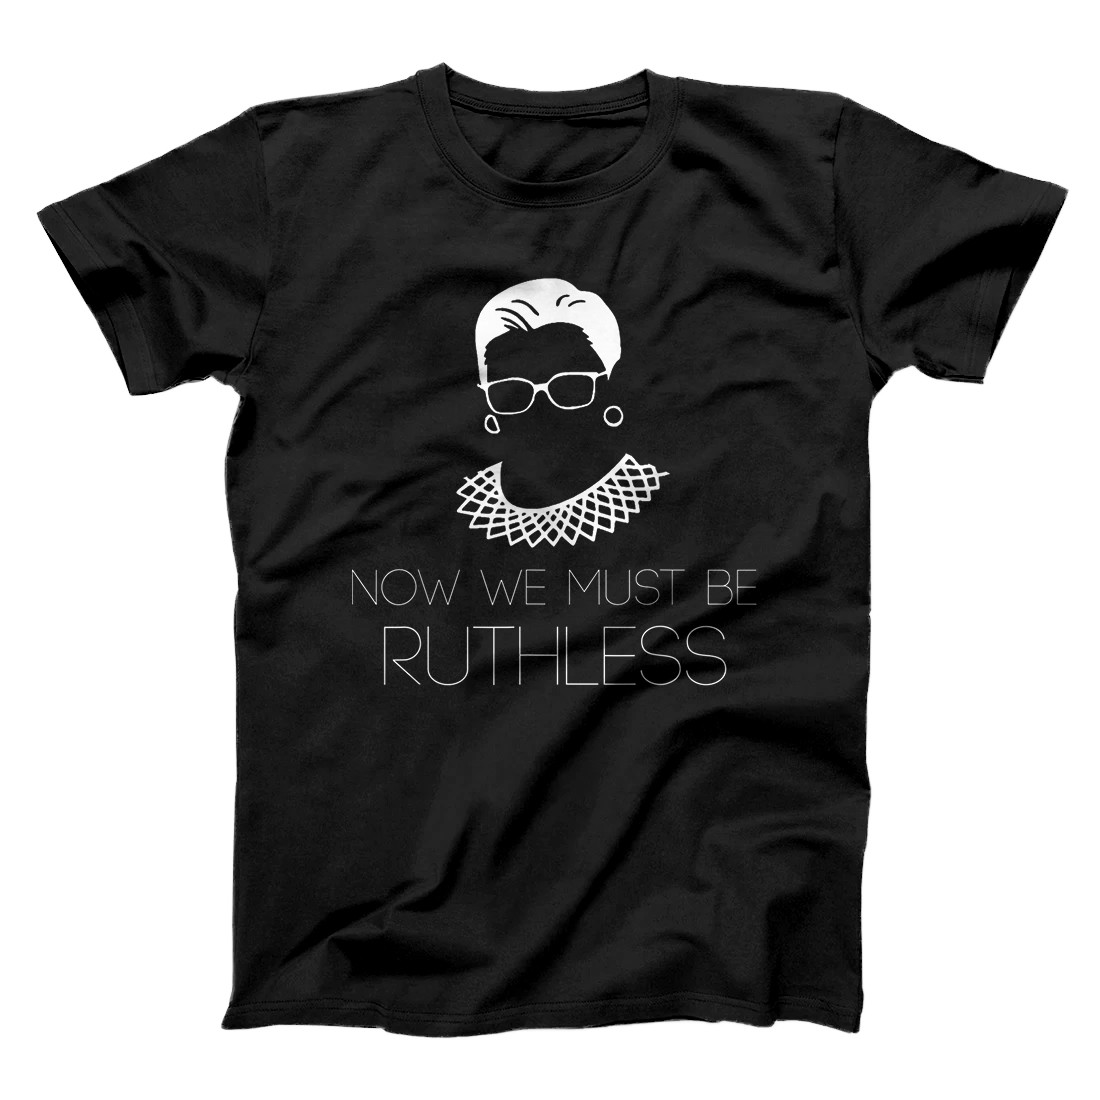 Personalized Ruth Bader Ginsberg RBG Now We Must be Ruthless T-Shirt